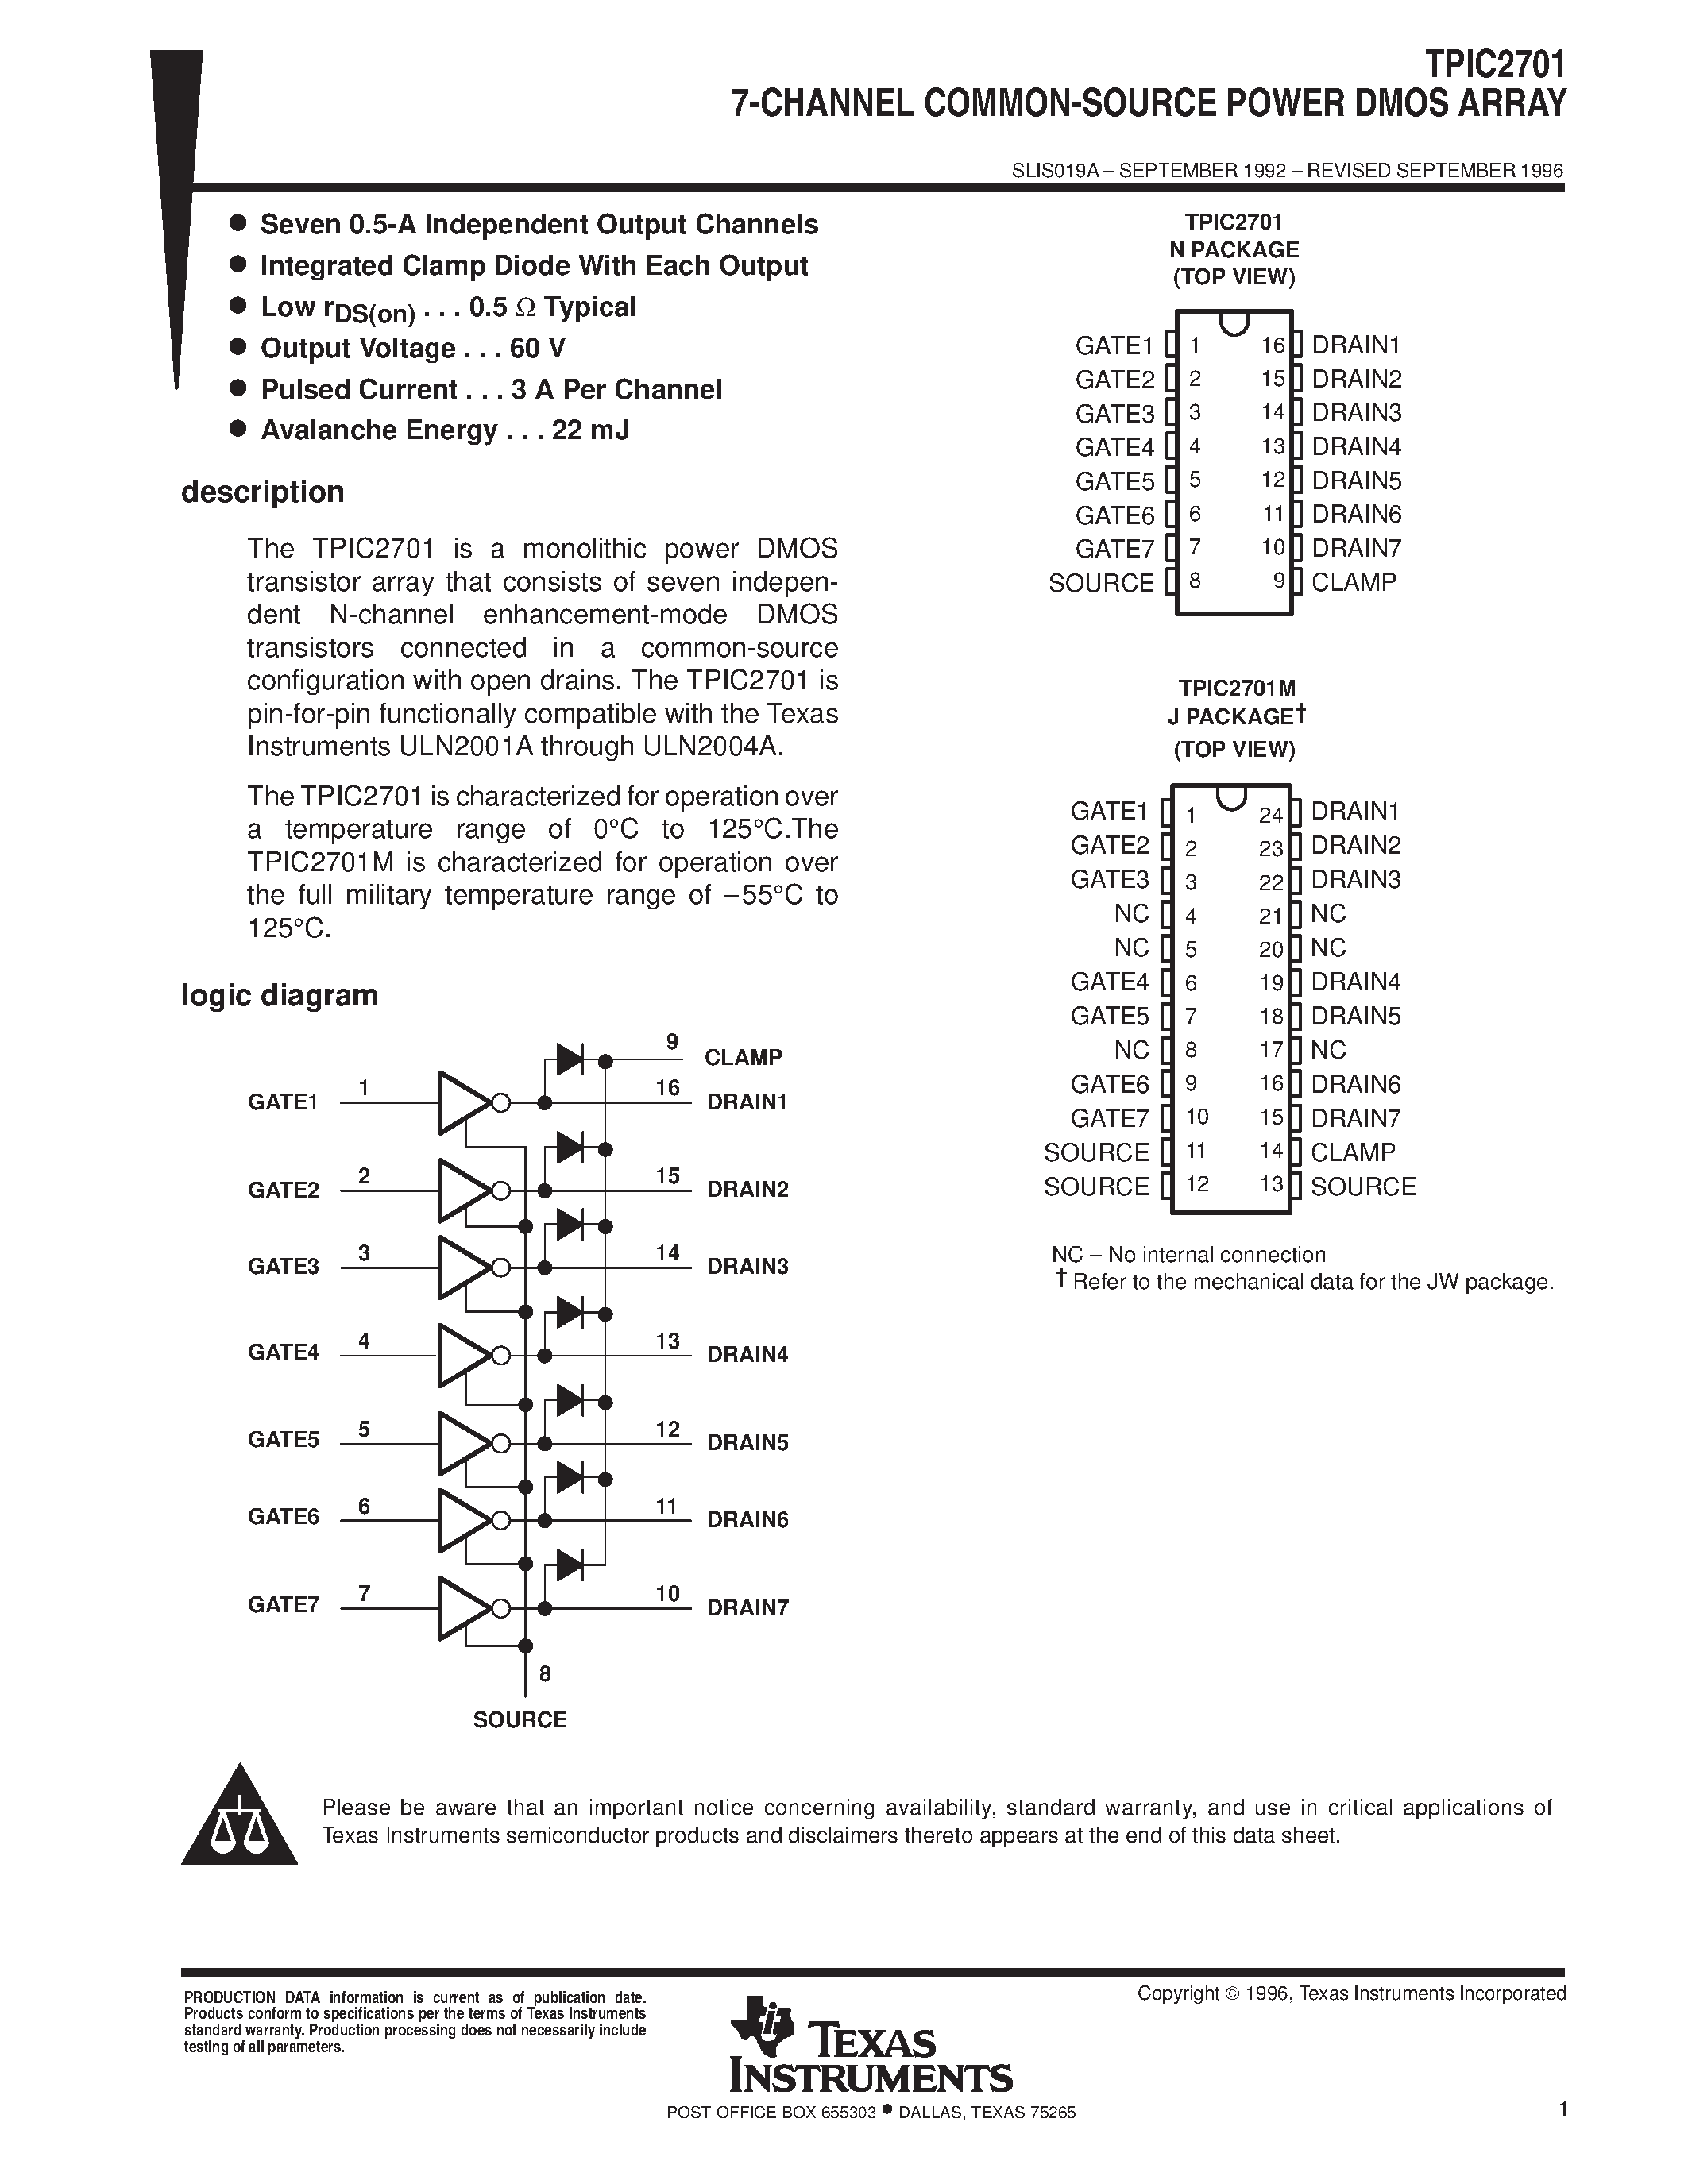 Datasheet TPIC2701M - 7-CHANNEL COMMON-SOURCE POWER DMOS ARRAY page 1